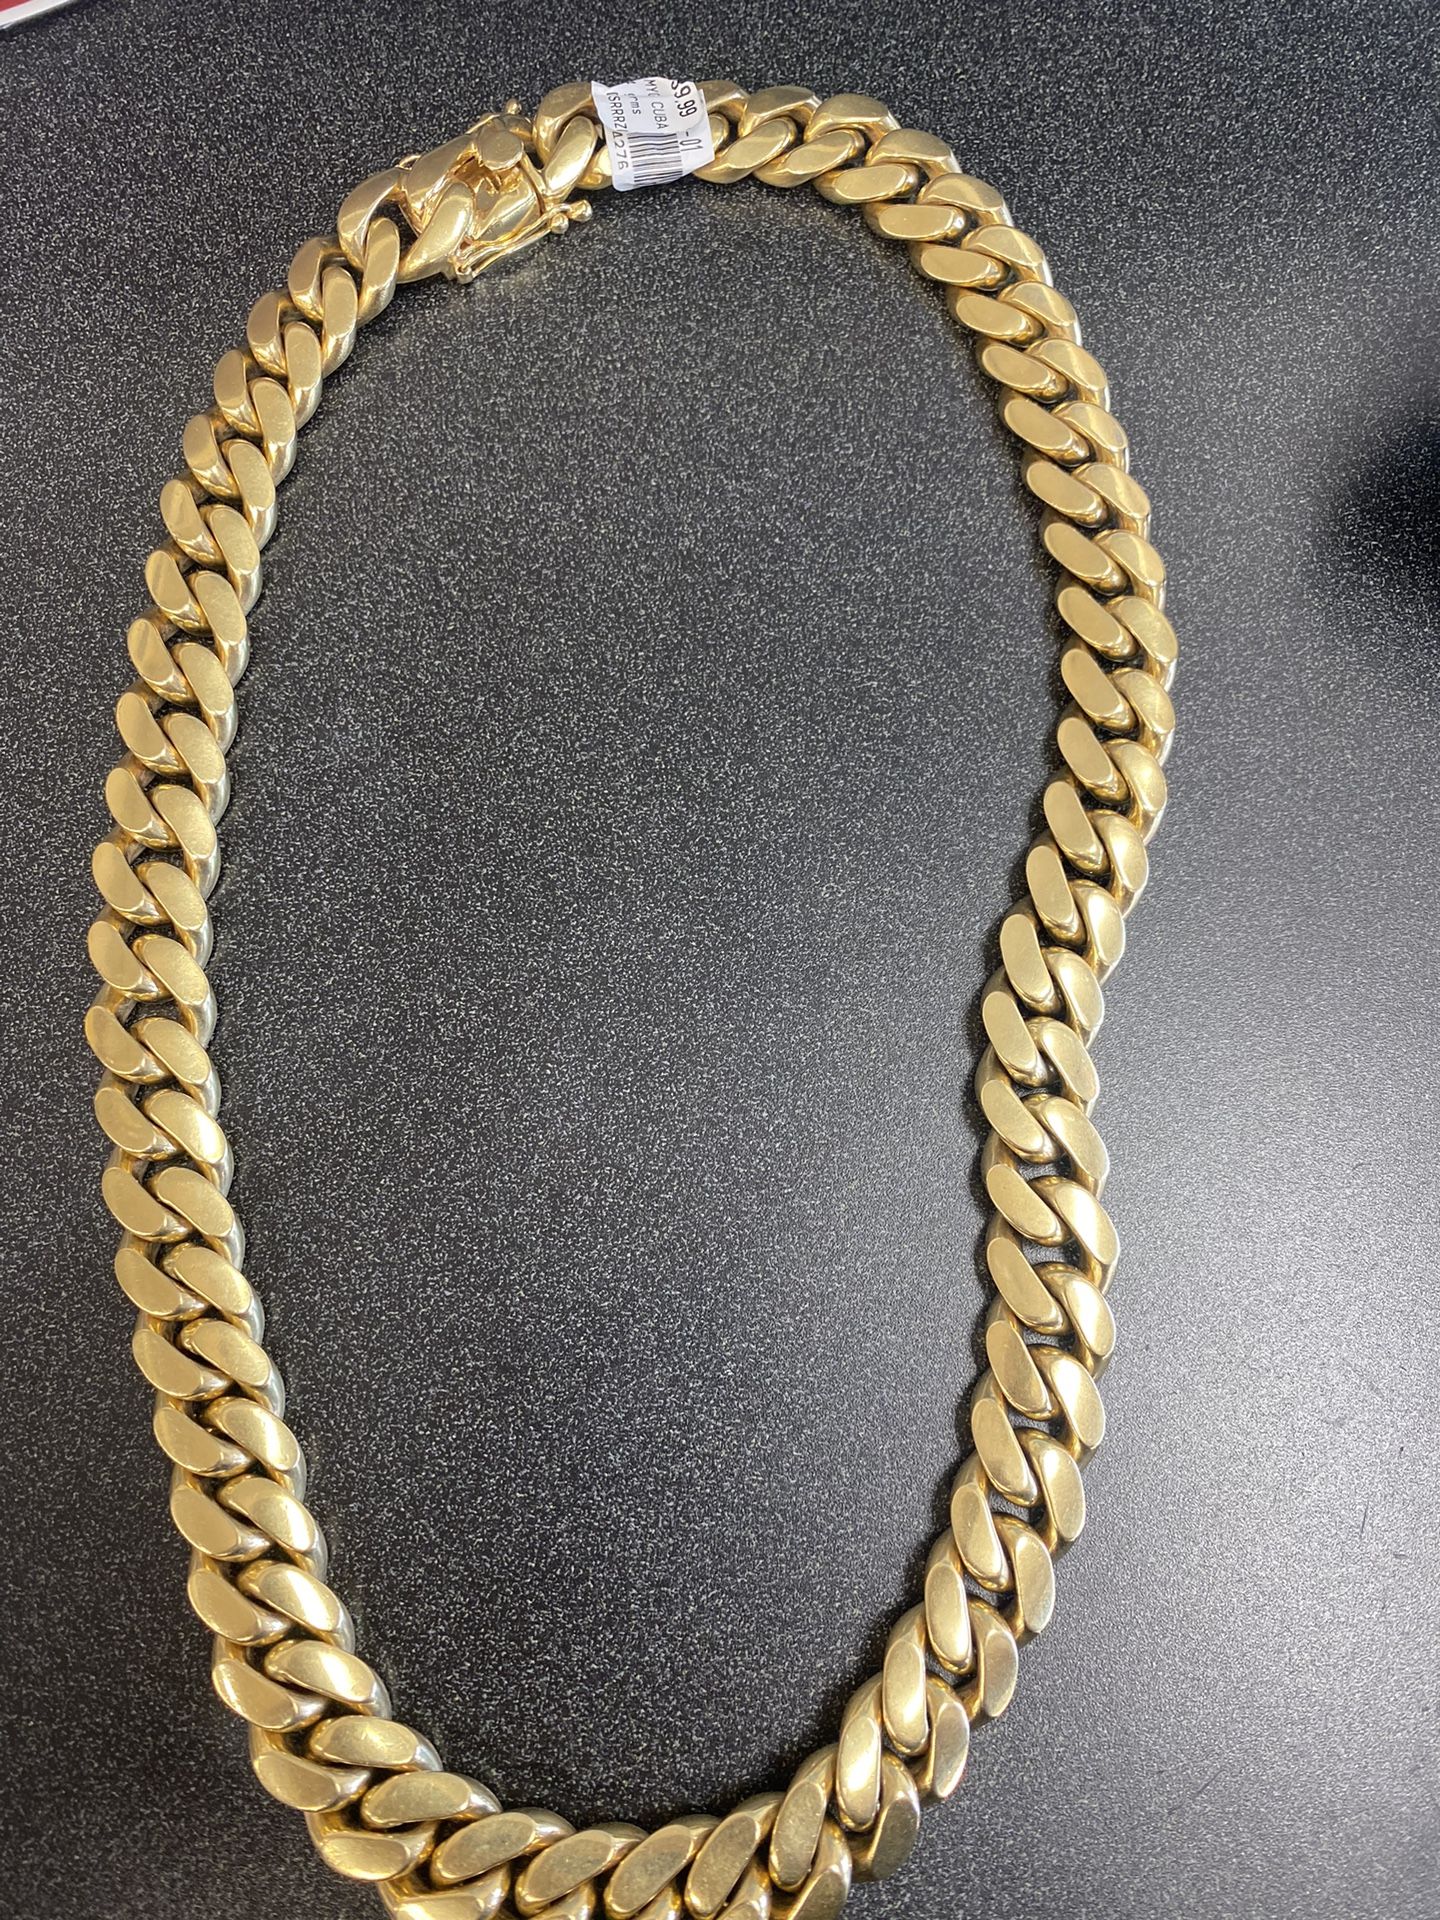 Cuban Necklace 14k Great Deal May 3-4